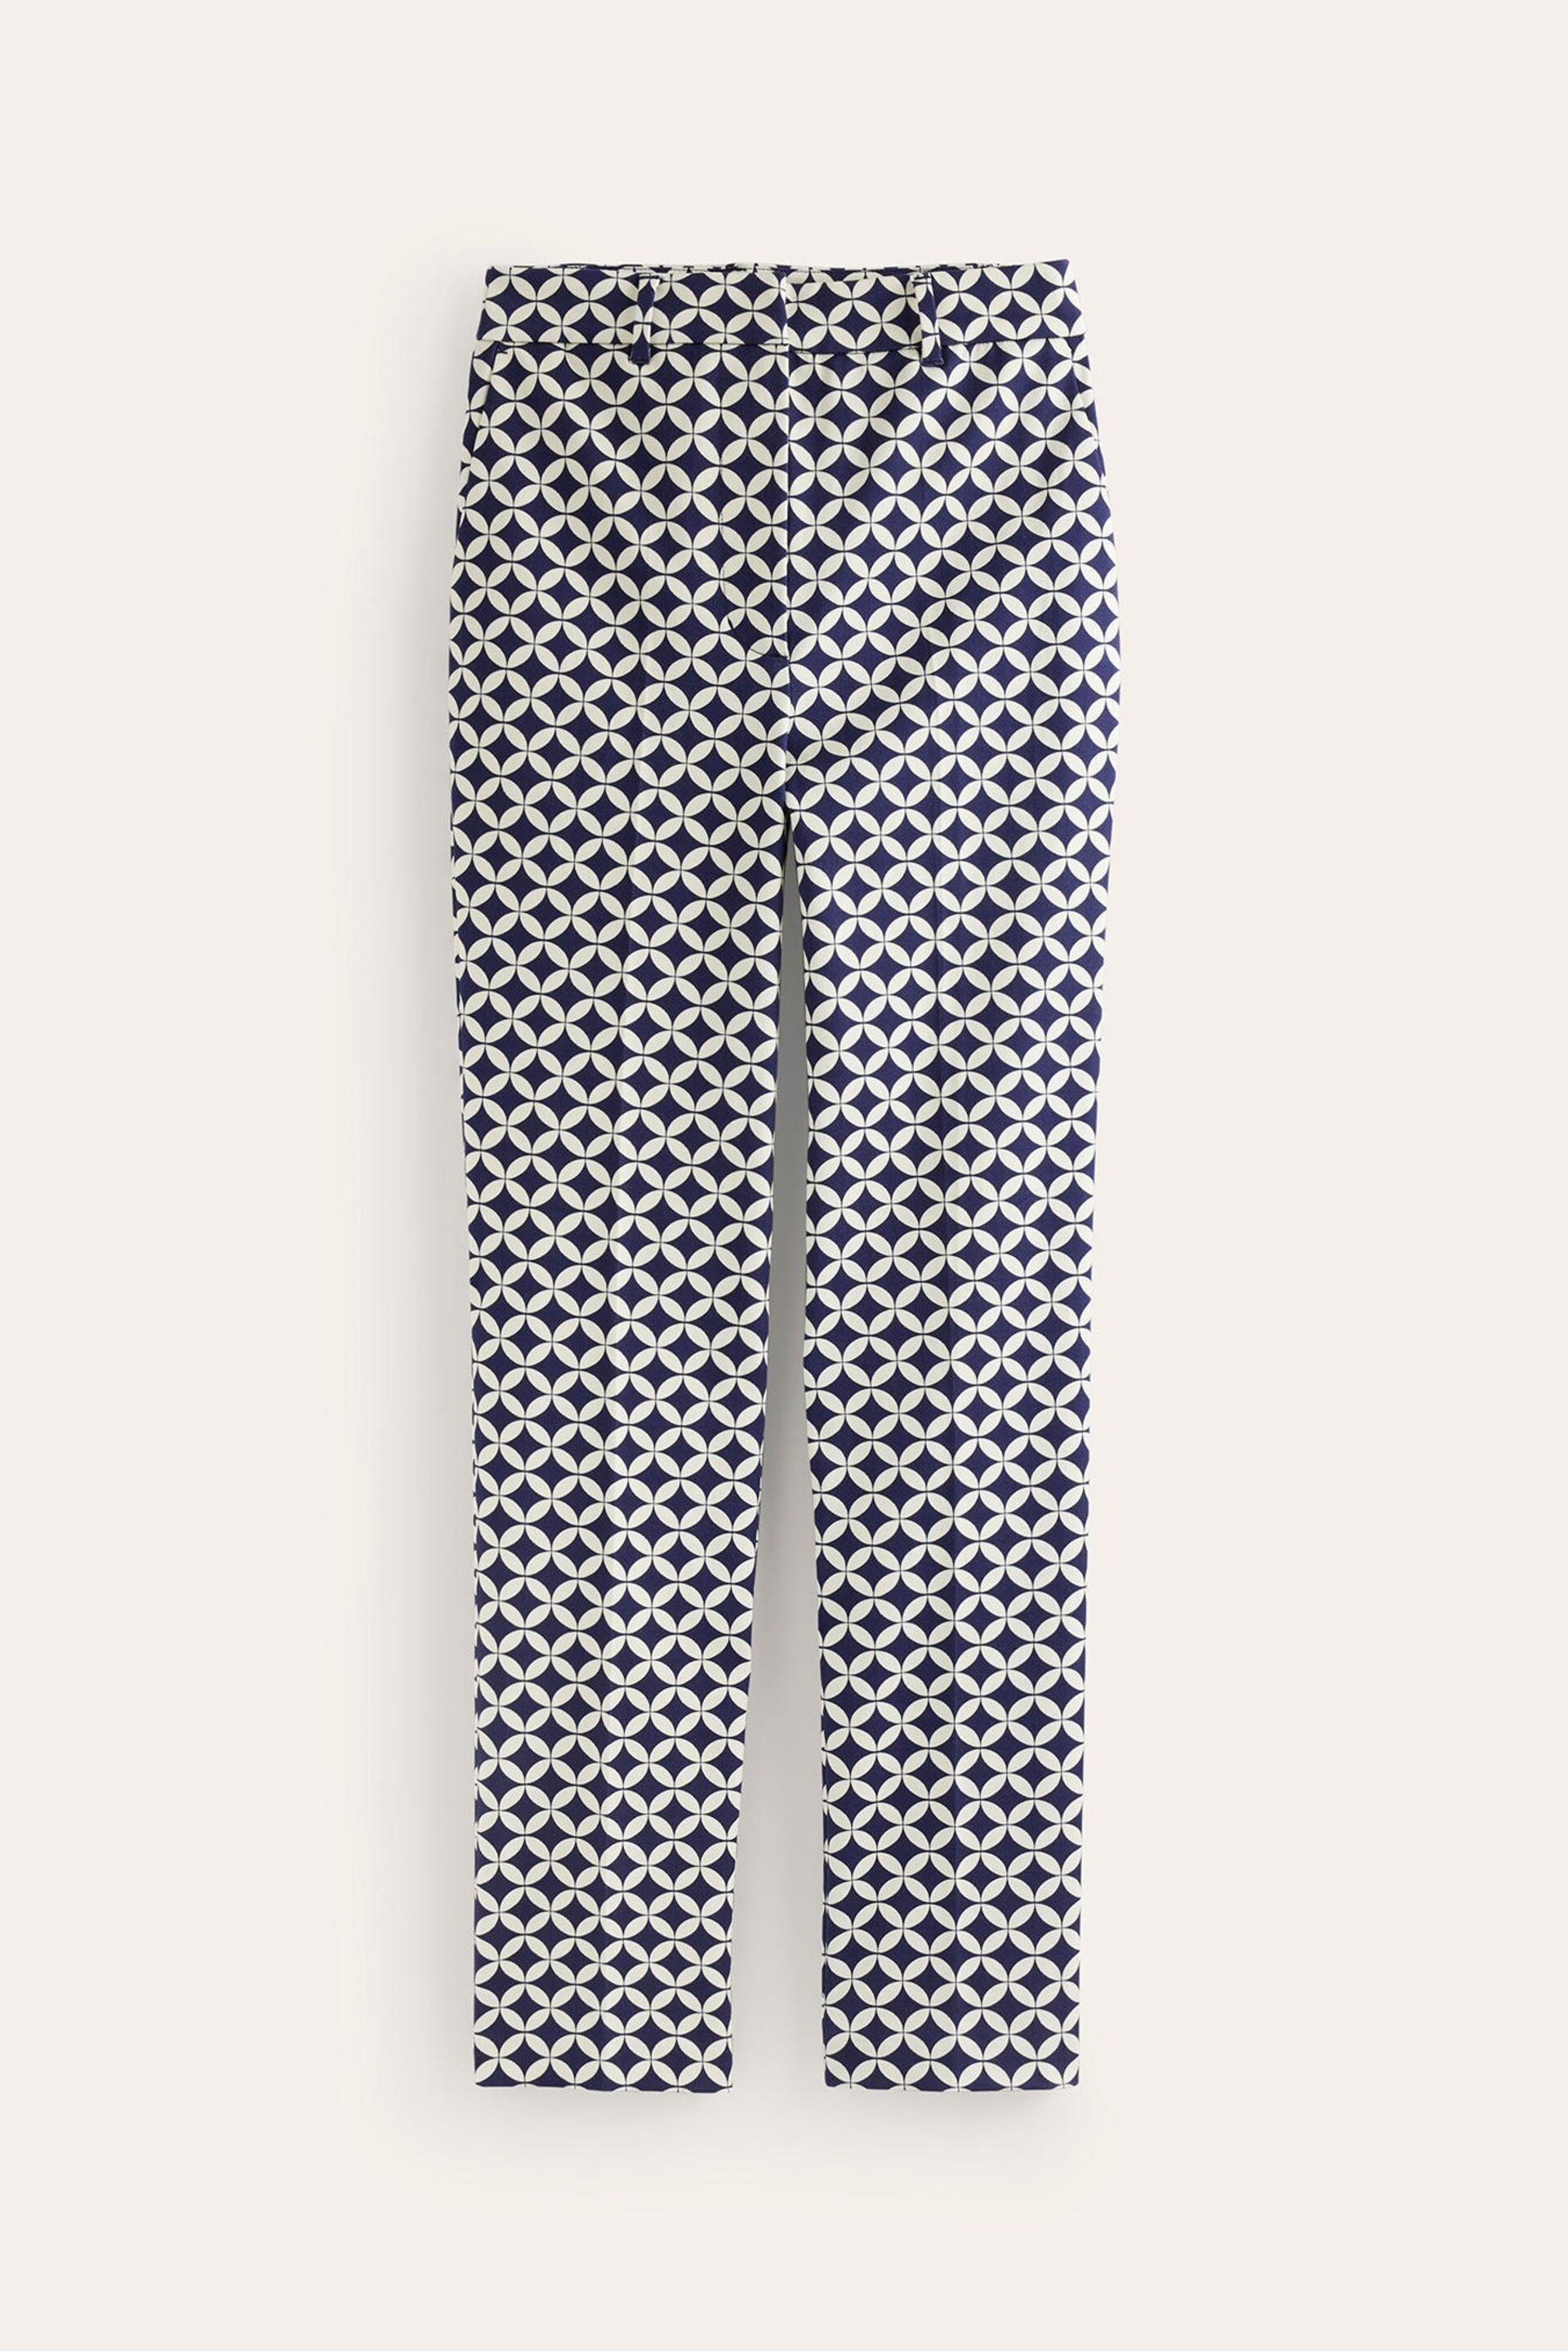 Boden Blue Highgate Printed Trousers - Image 5 of 5